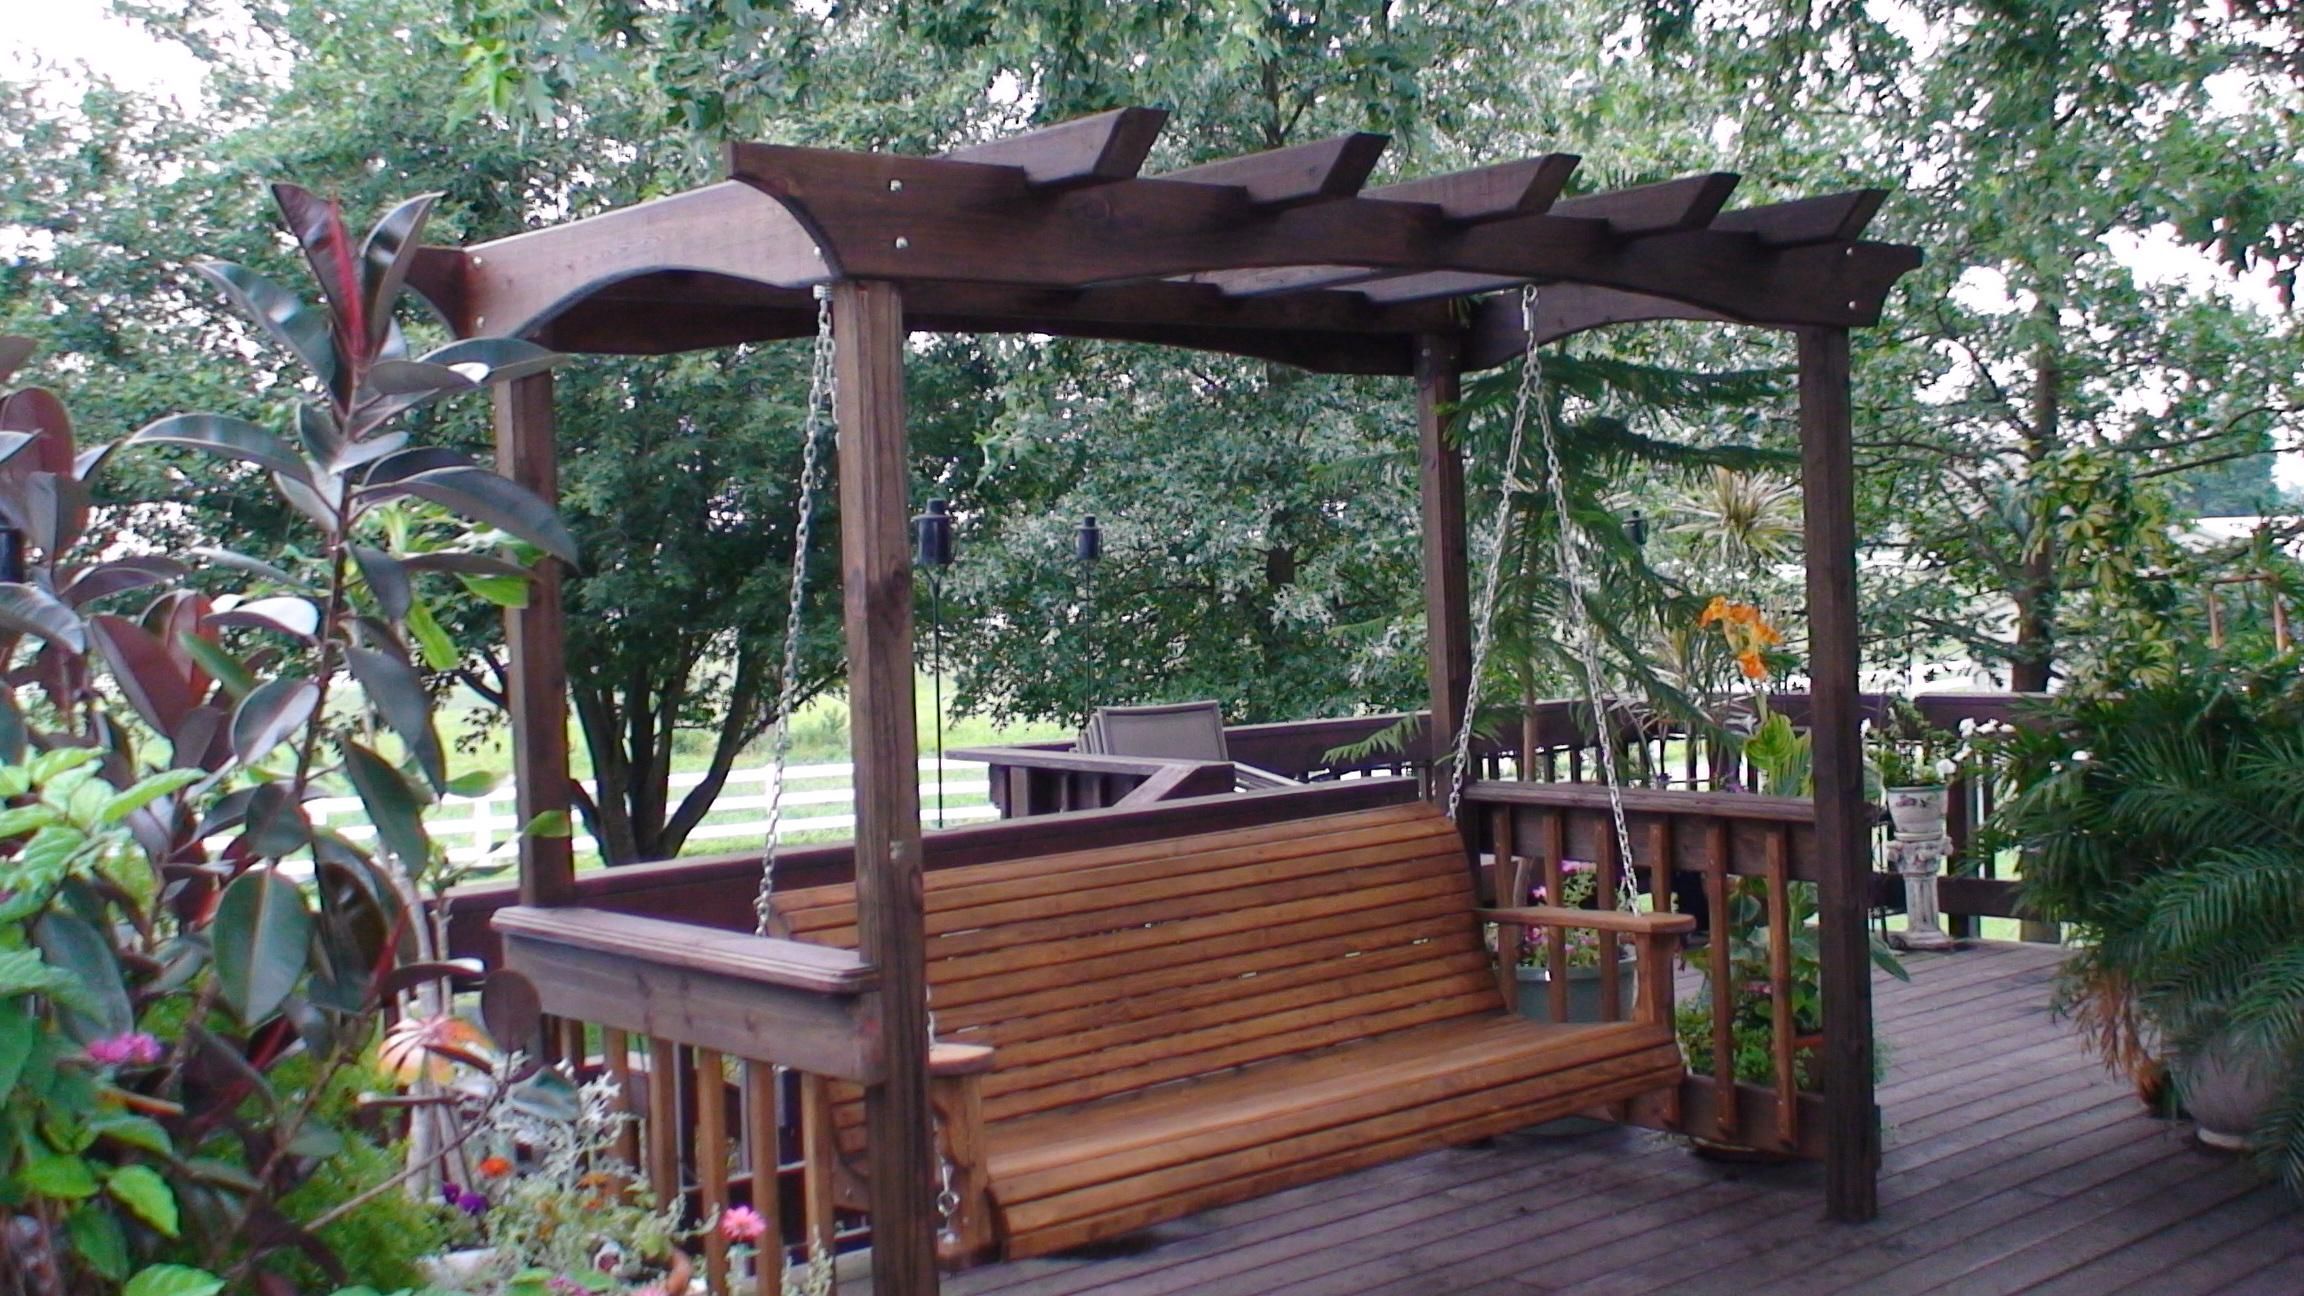 Patio Gazebo Porch Swings For Most Current Modern Standing Porch Swing Pavillion Home Designs The Best (View 11 of 30)